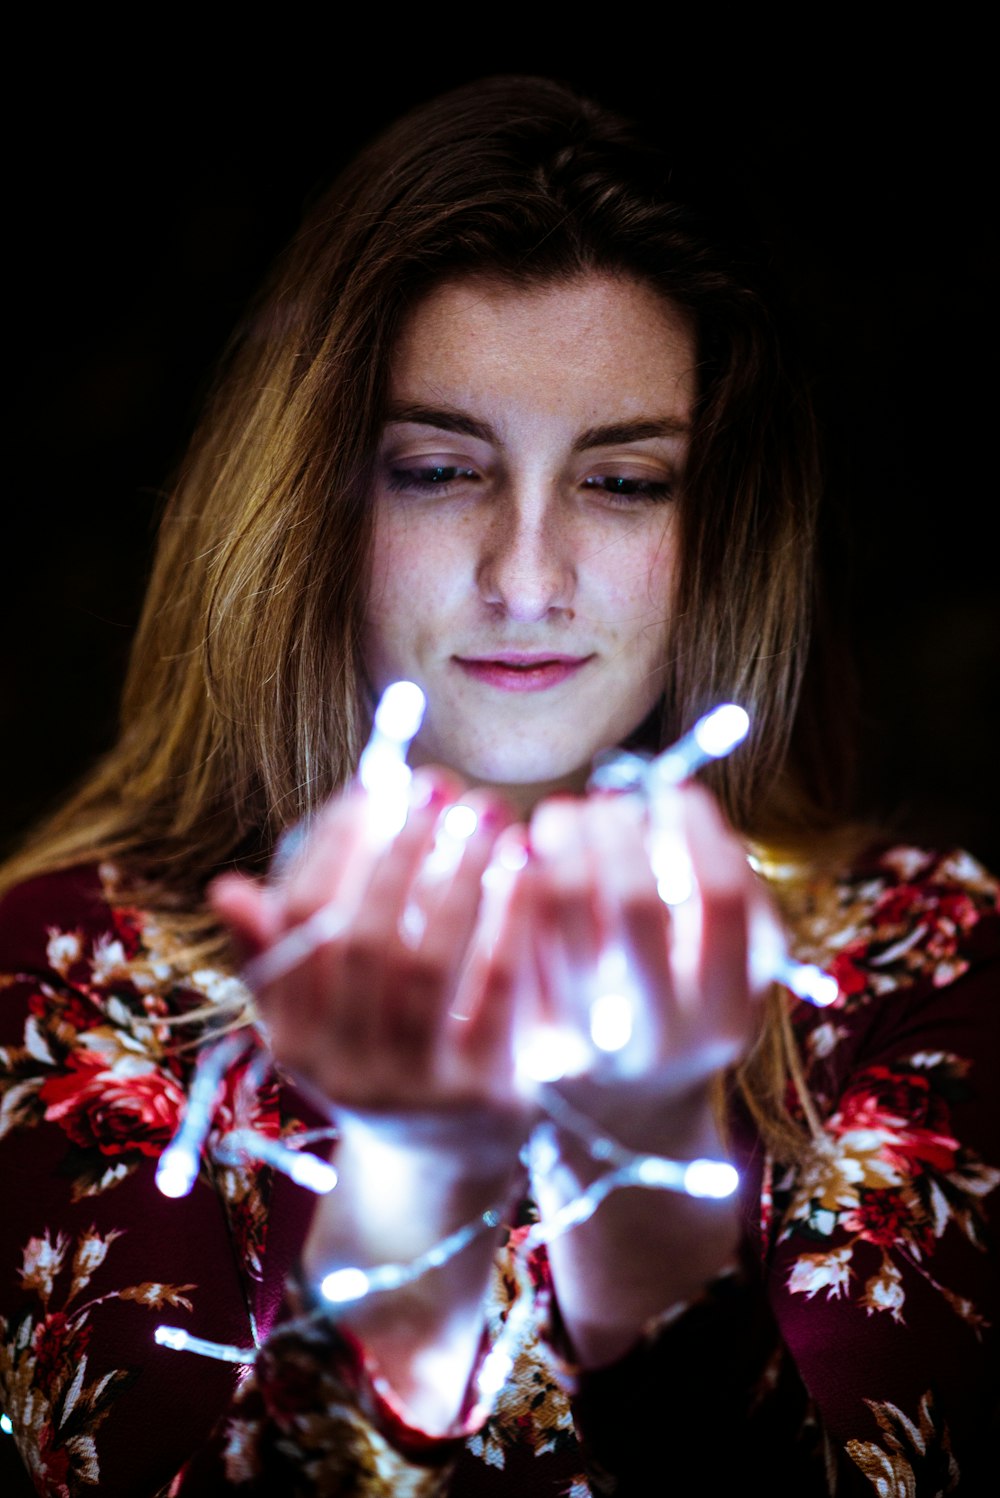 a woman holding a lit up hand in front of her face